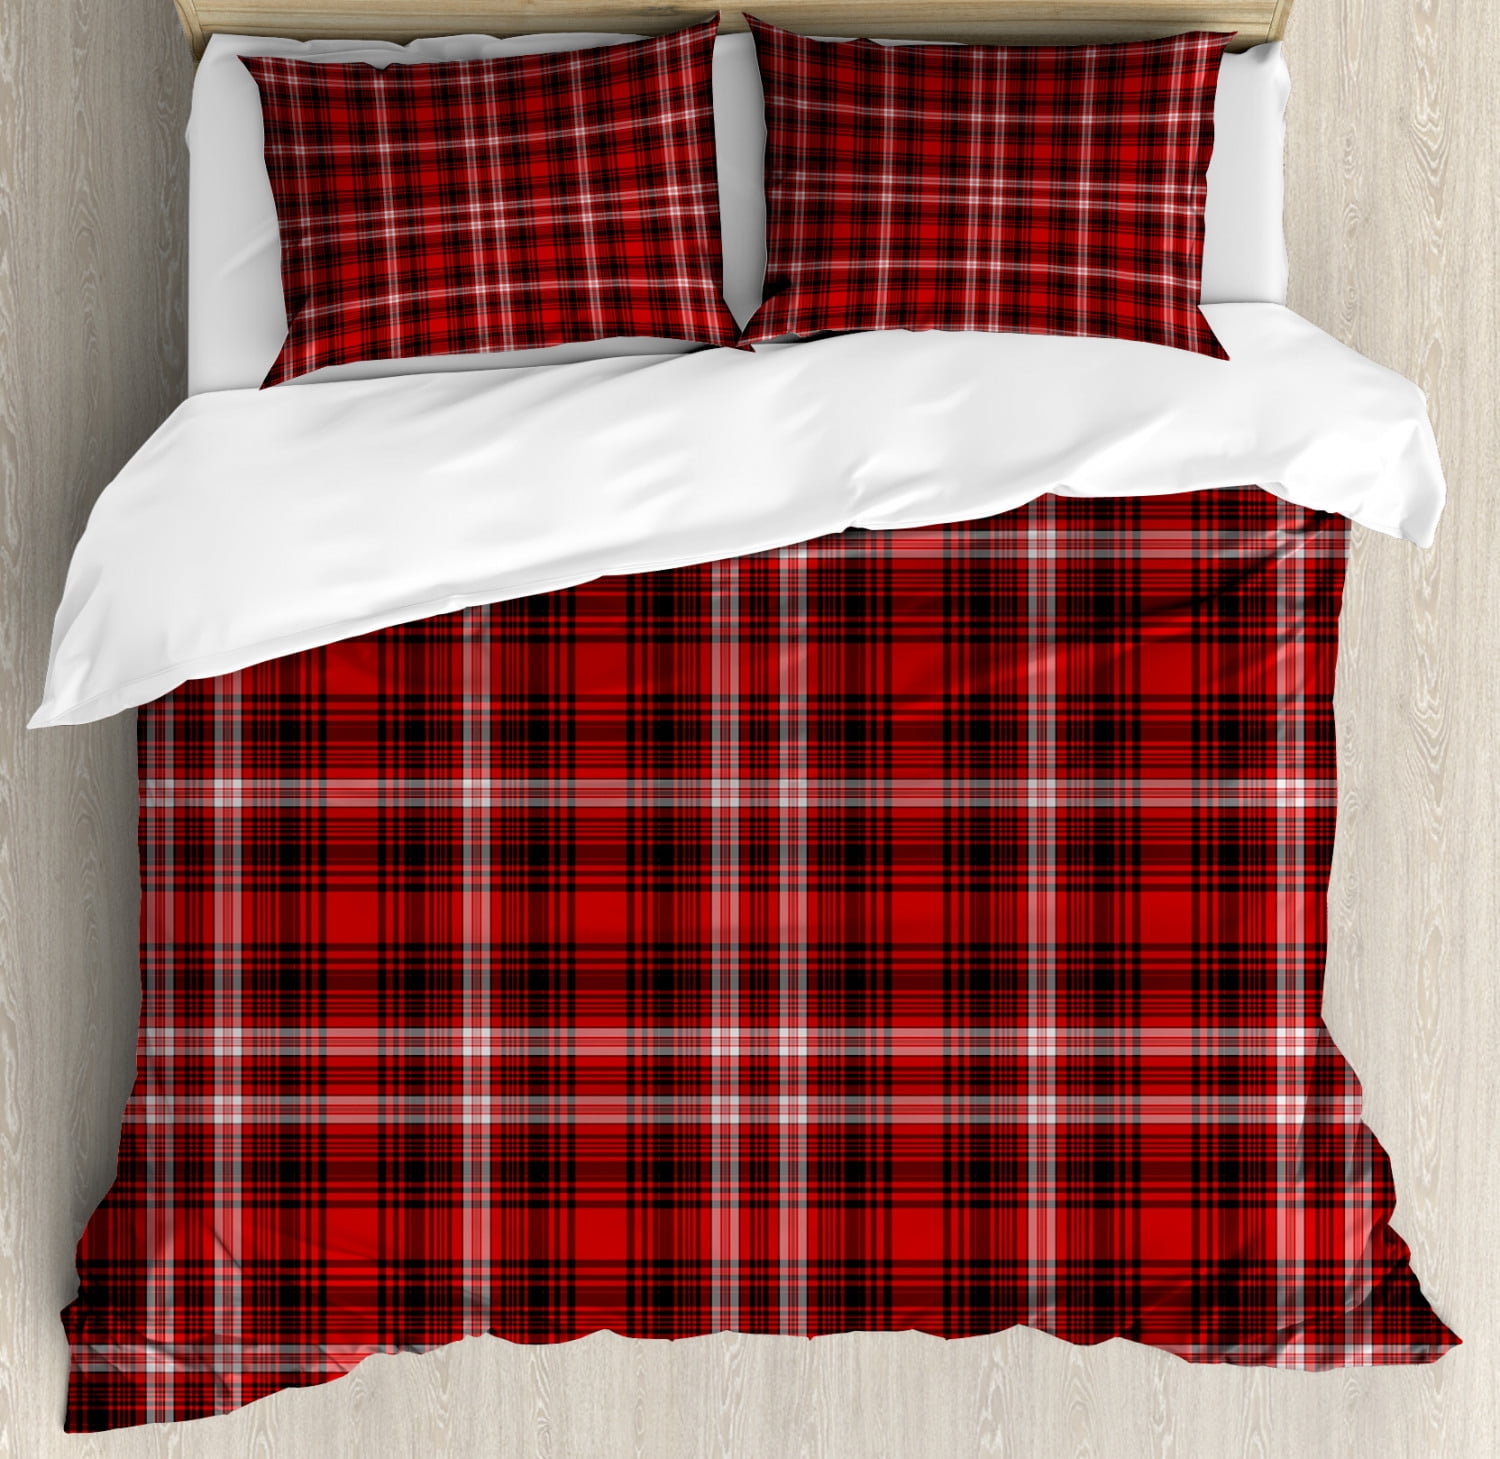 Plaid Duvet Cover Set Queen Size, Red Black And White Duvet Covers